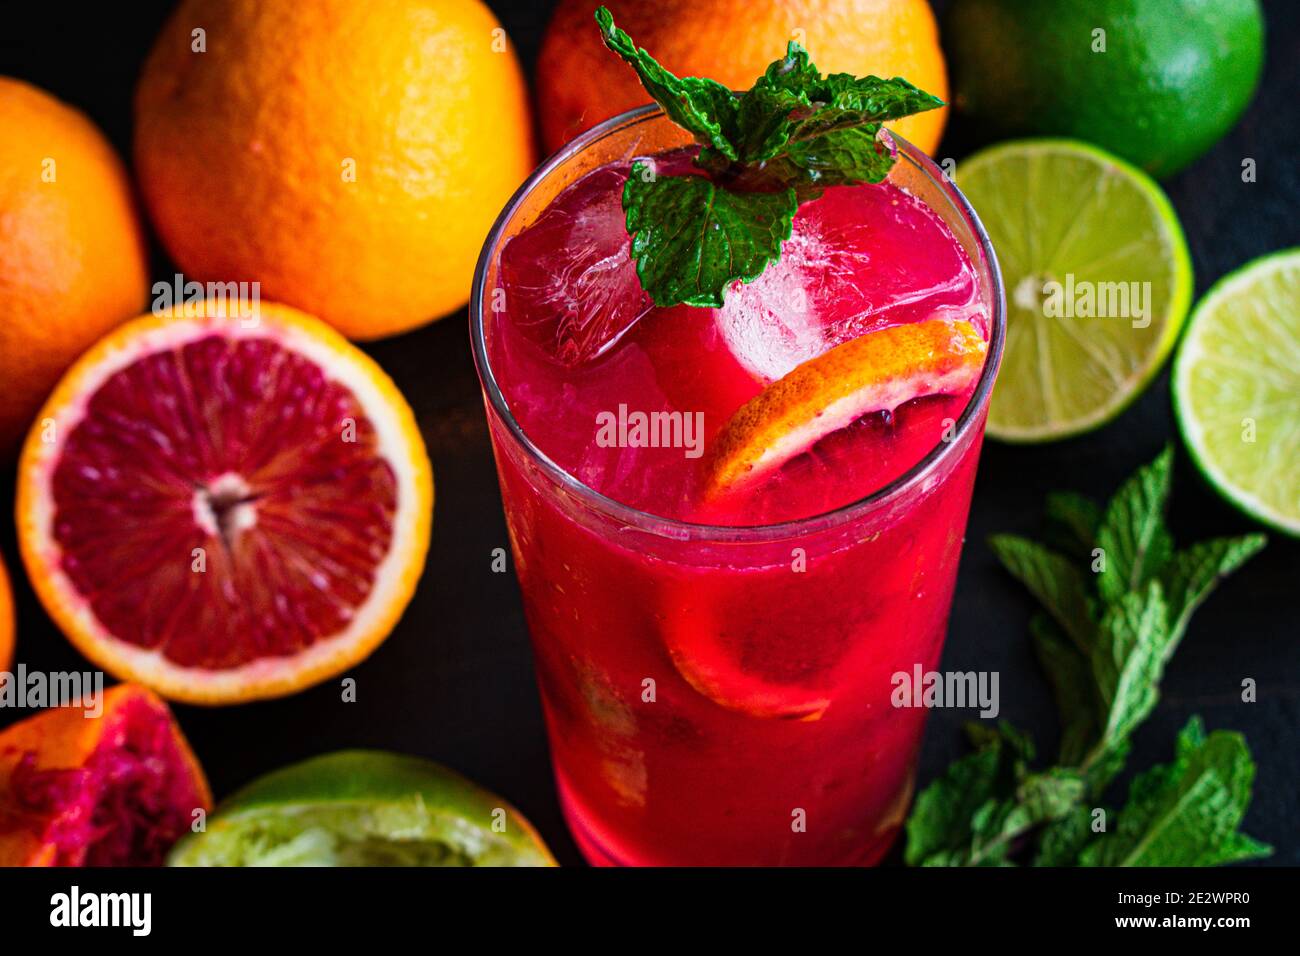 Blood Orange and Raspberry Mojito: A rum cocktail with blood oranges, raspberries, lime, and mint leaves served in a tall glass over ice Stock Photo